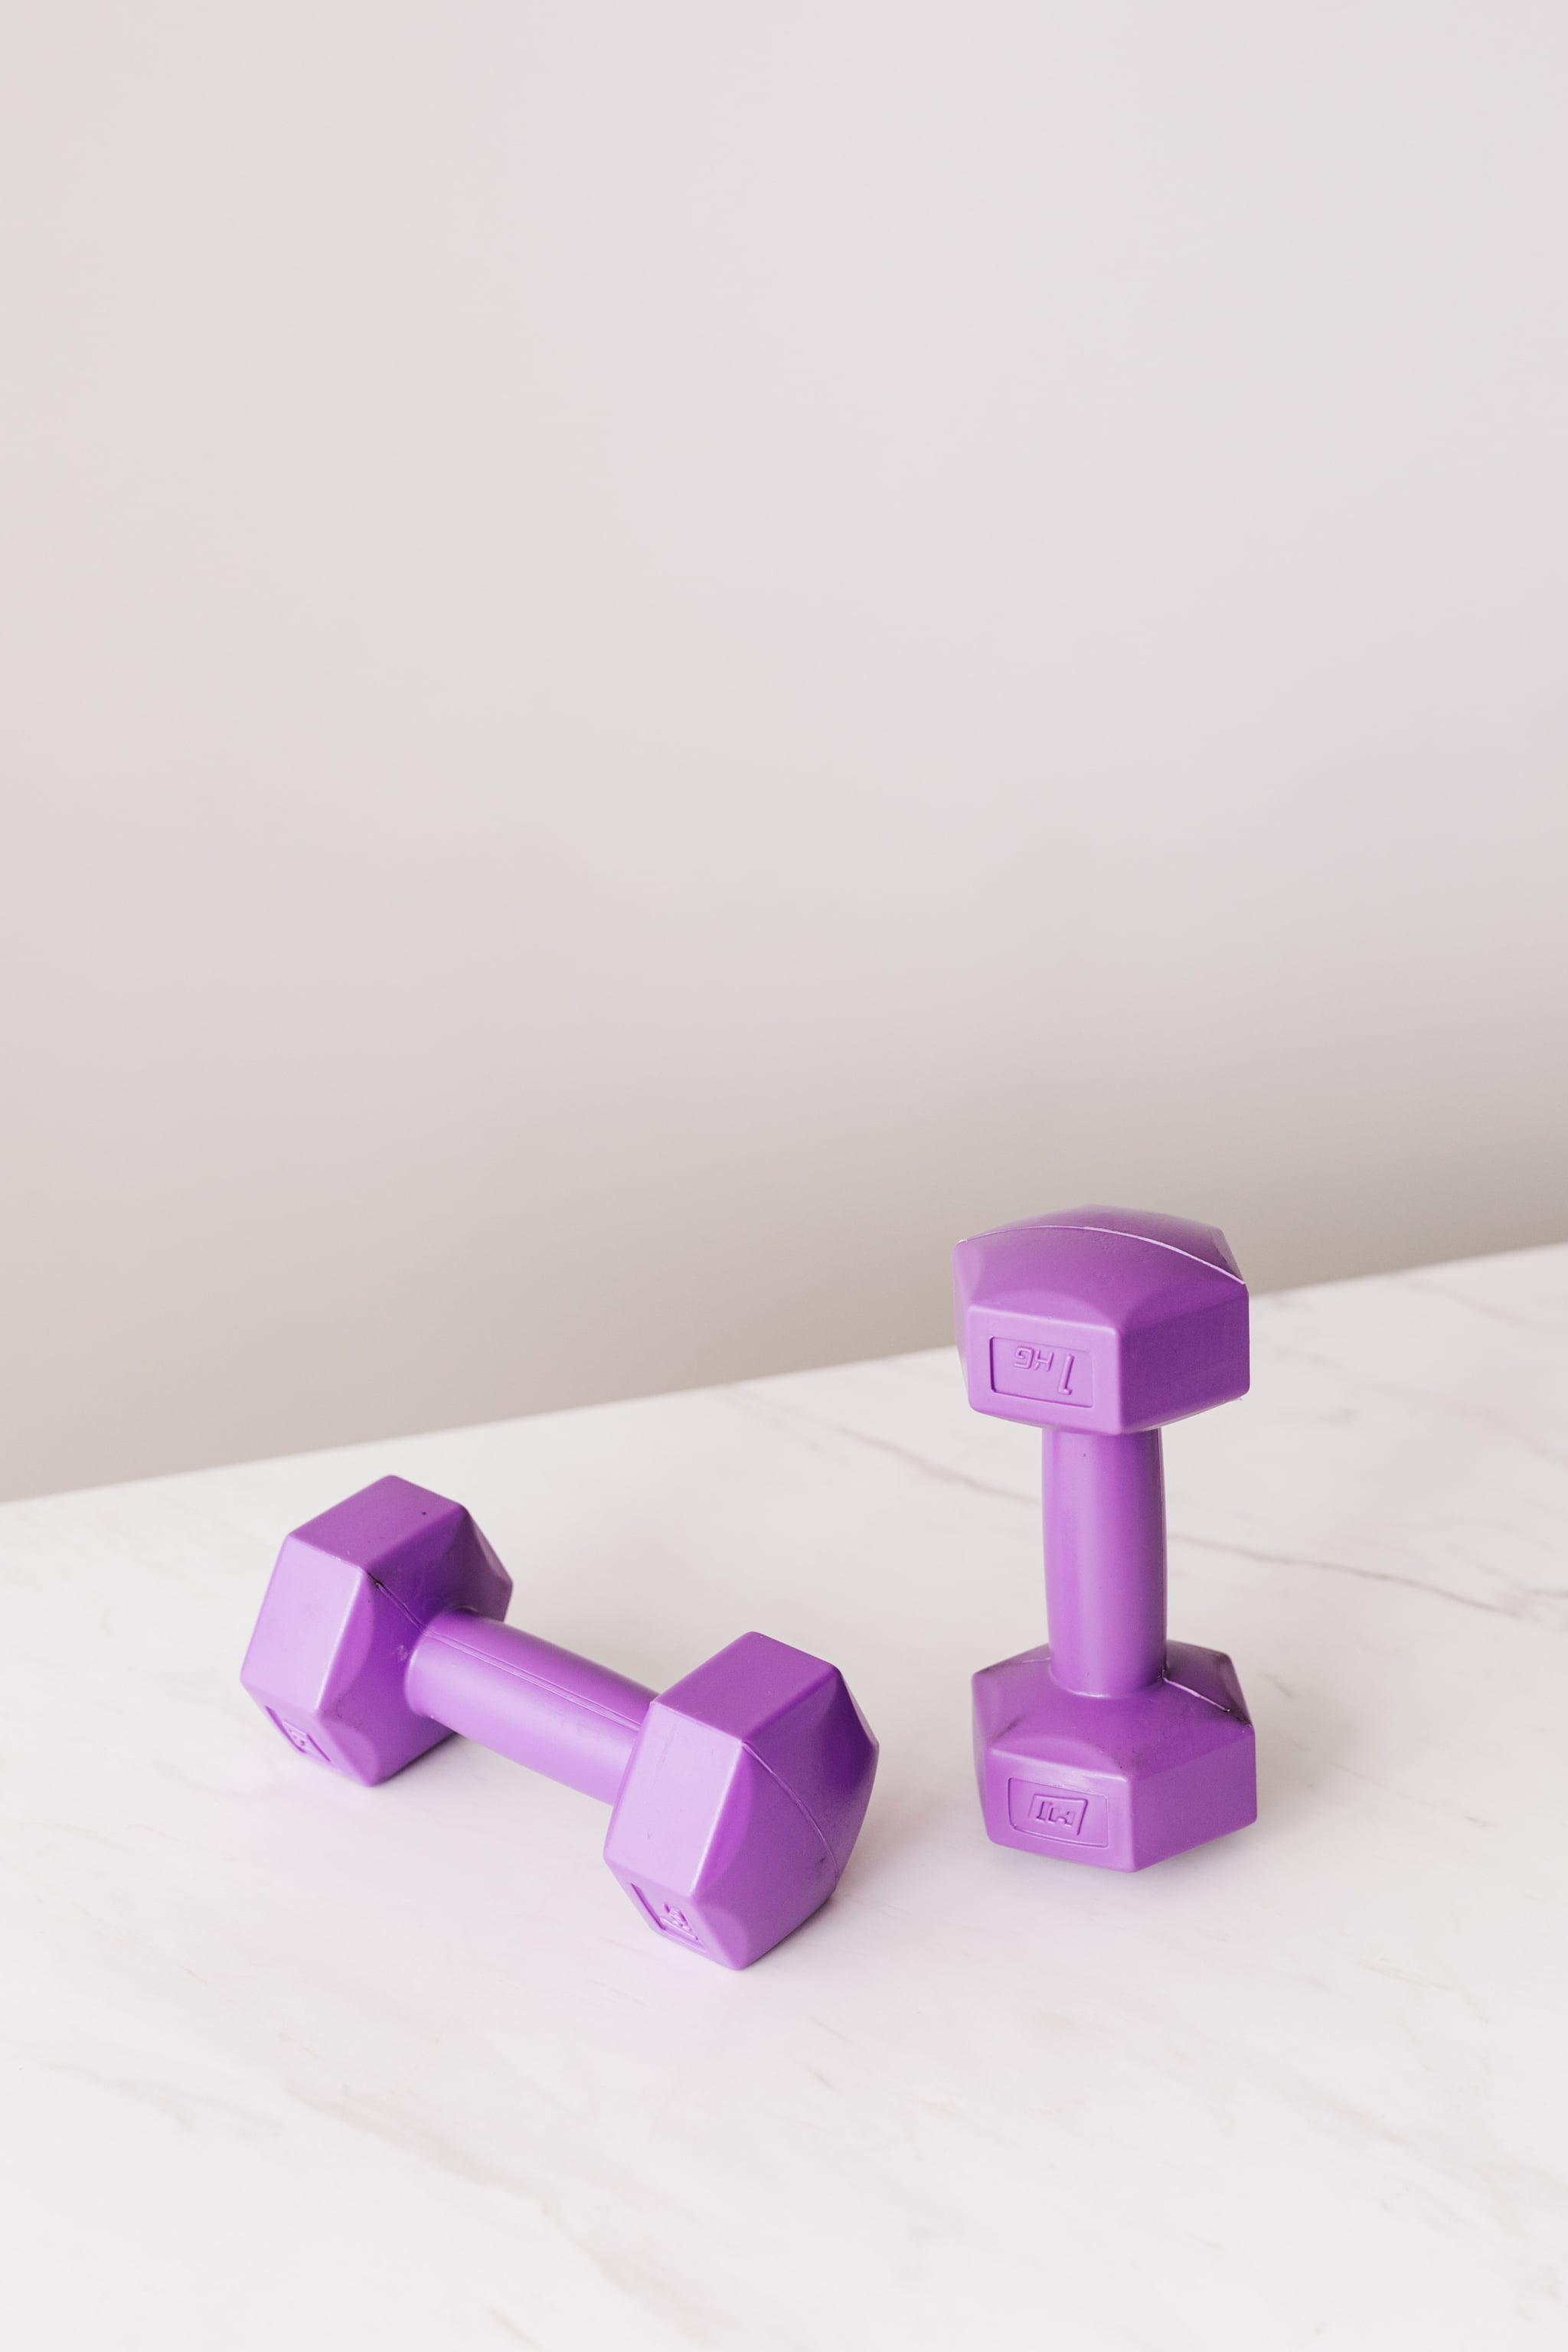 22 Workout Wallpapers For Your Phone | POPSUGAR Fitness